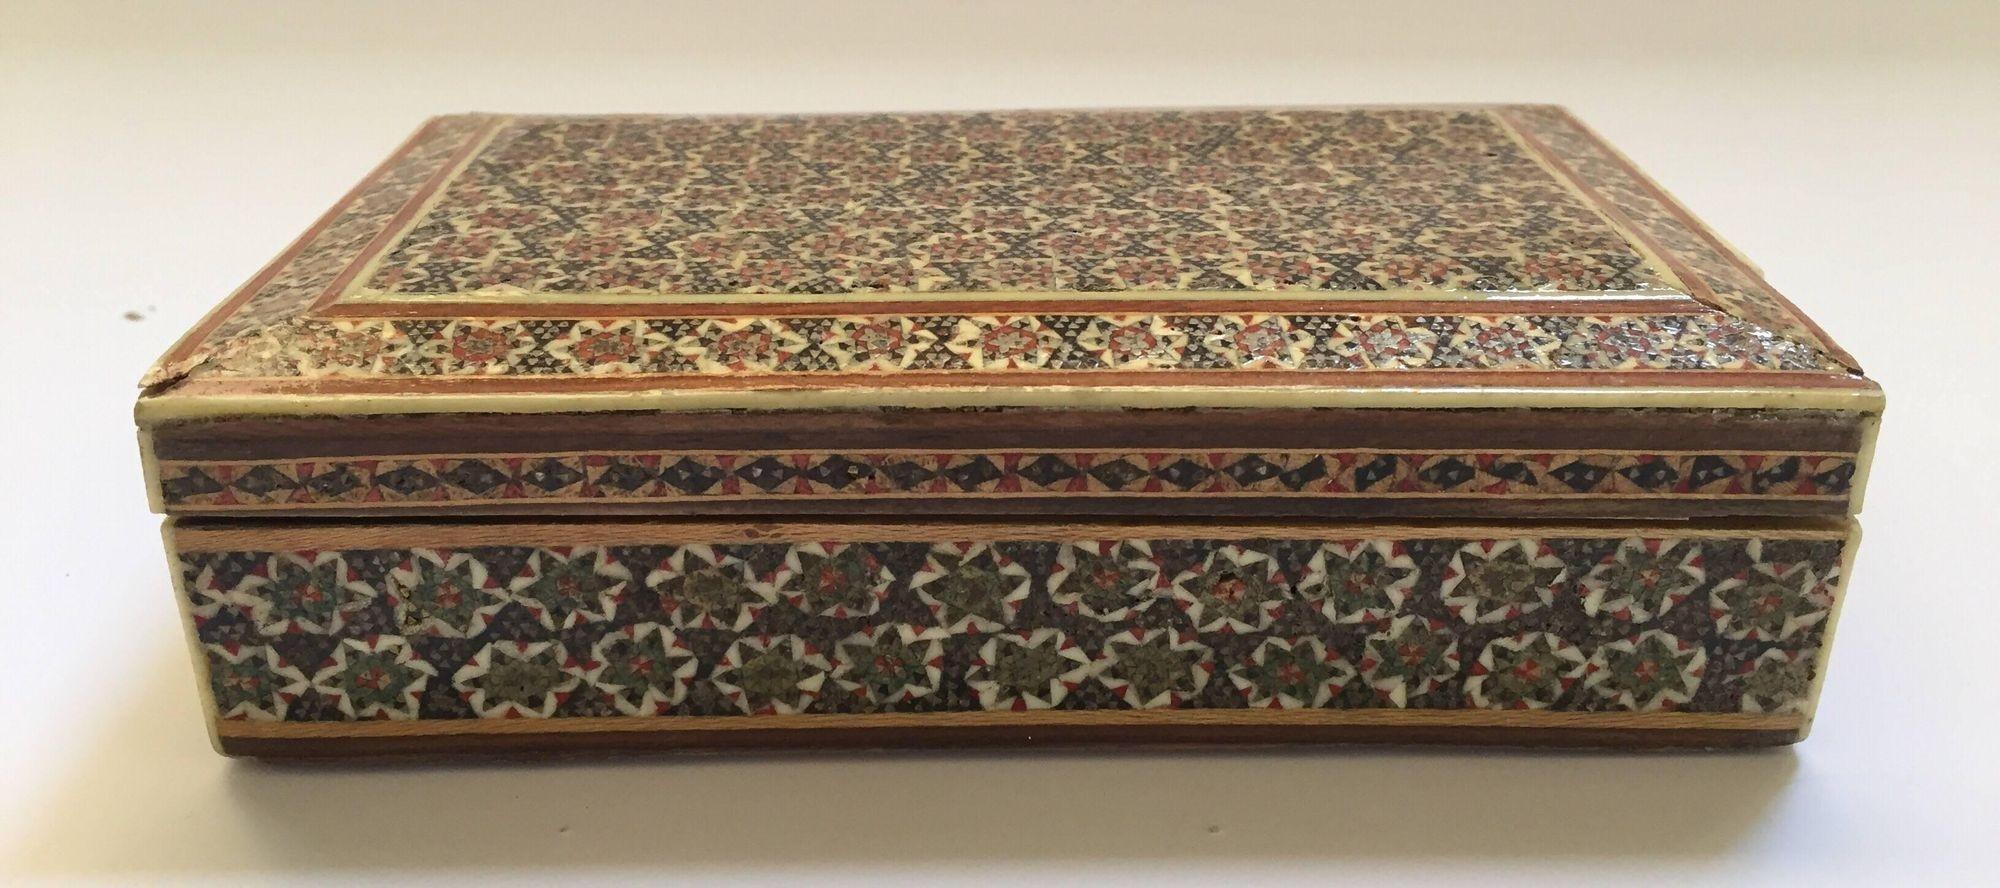 Handcrafted micro mosaic box inlaid in geometric design.
This Middle Eastern Persian inlay boxes were used to store cigarettes, or playing cards.
Museum quality piece like the ones in Doris Duke Islamic Art Museum.
Dimension.
6.5